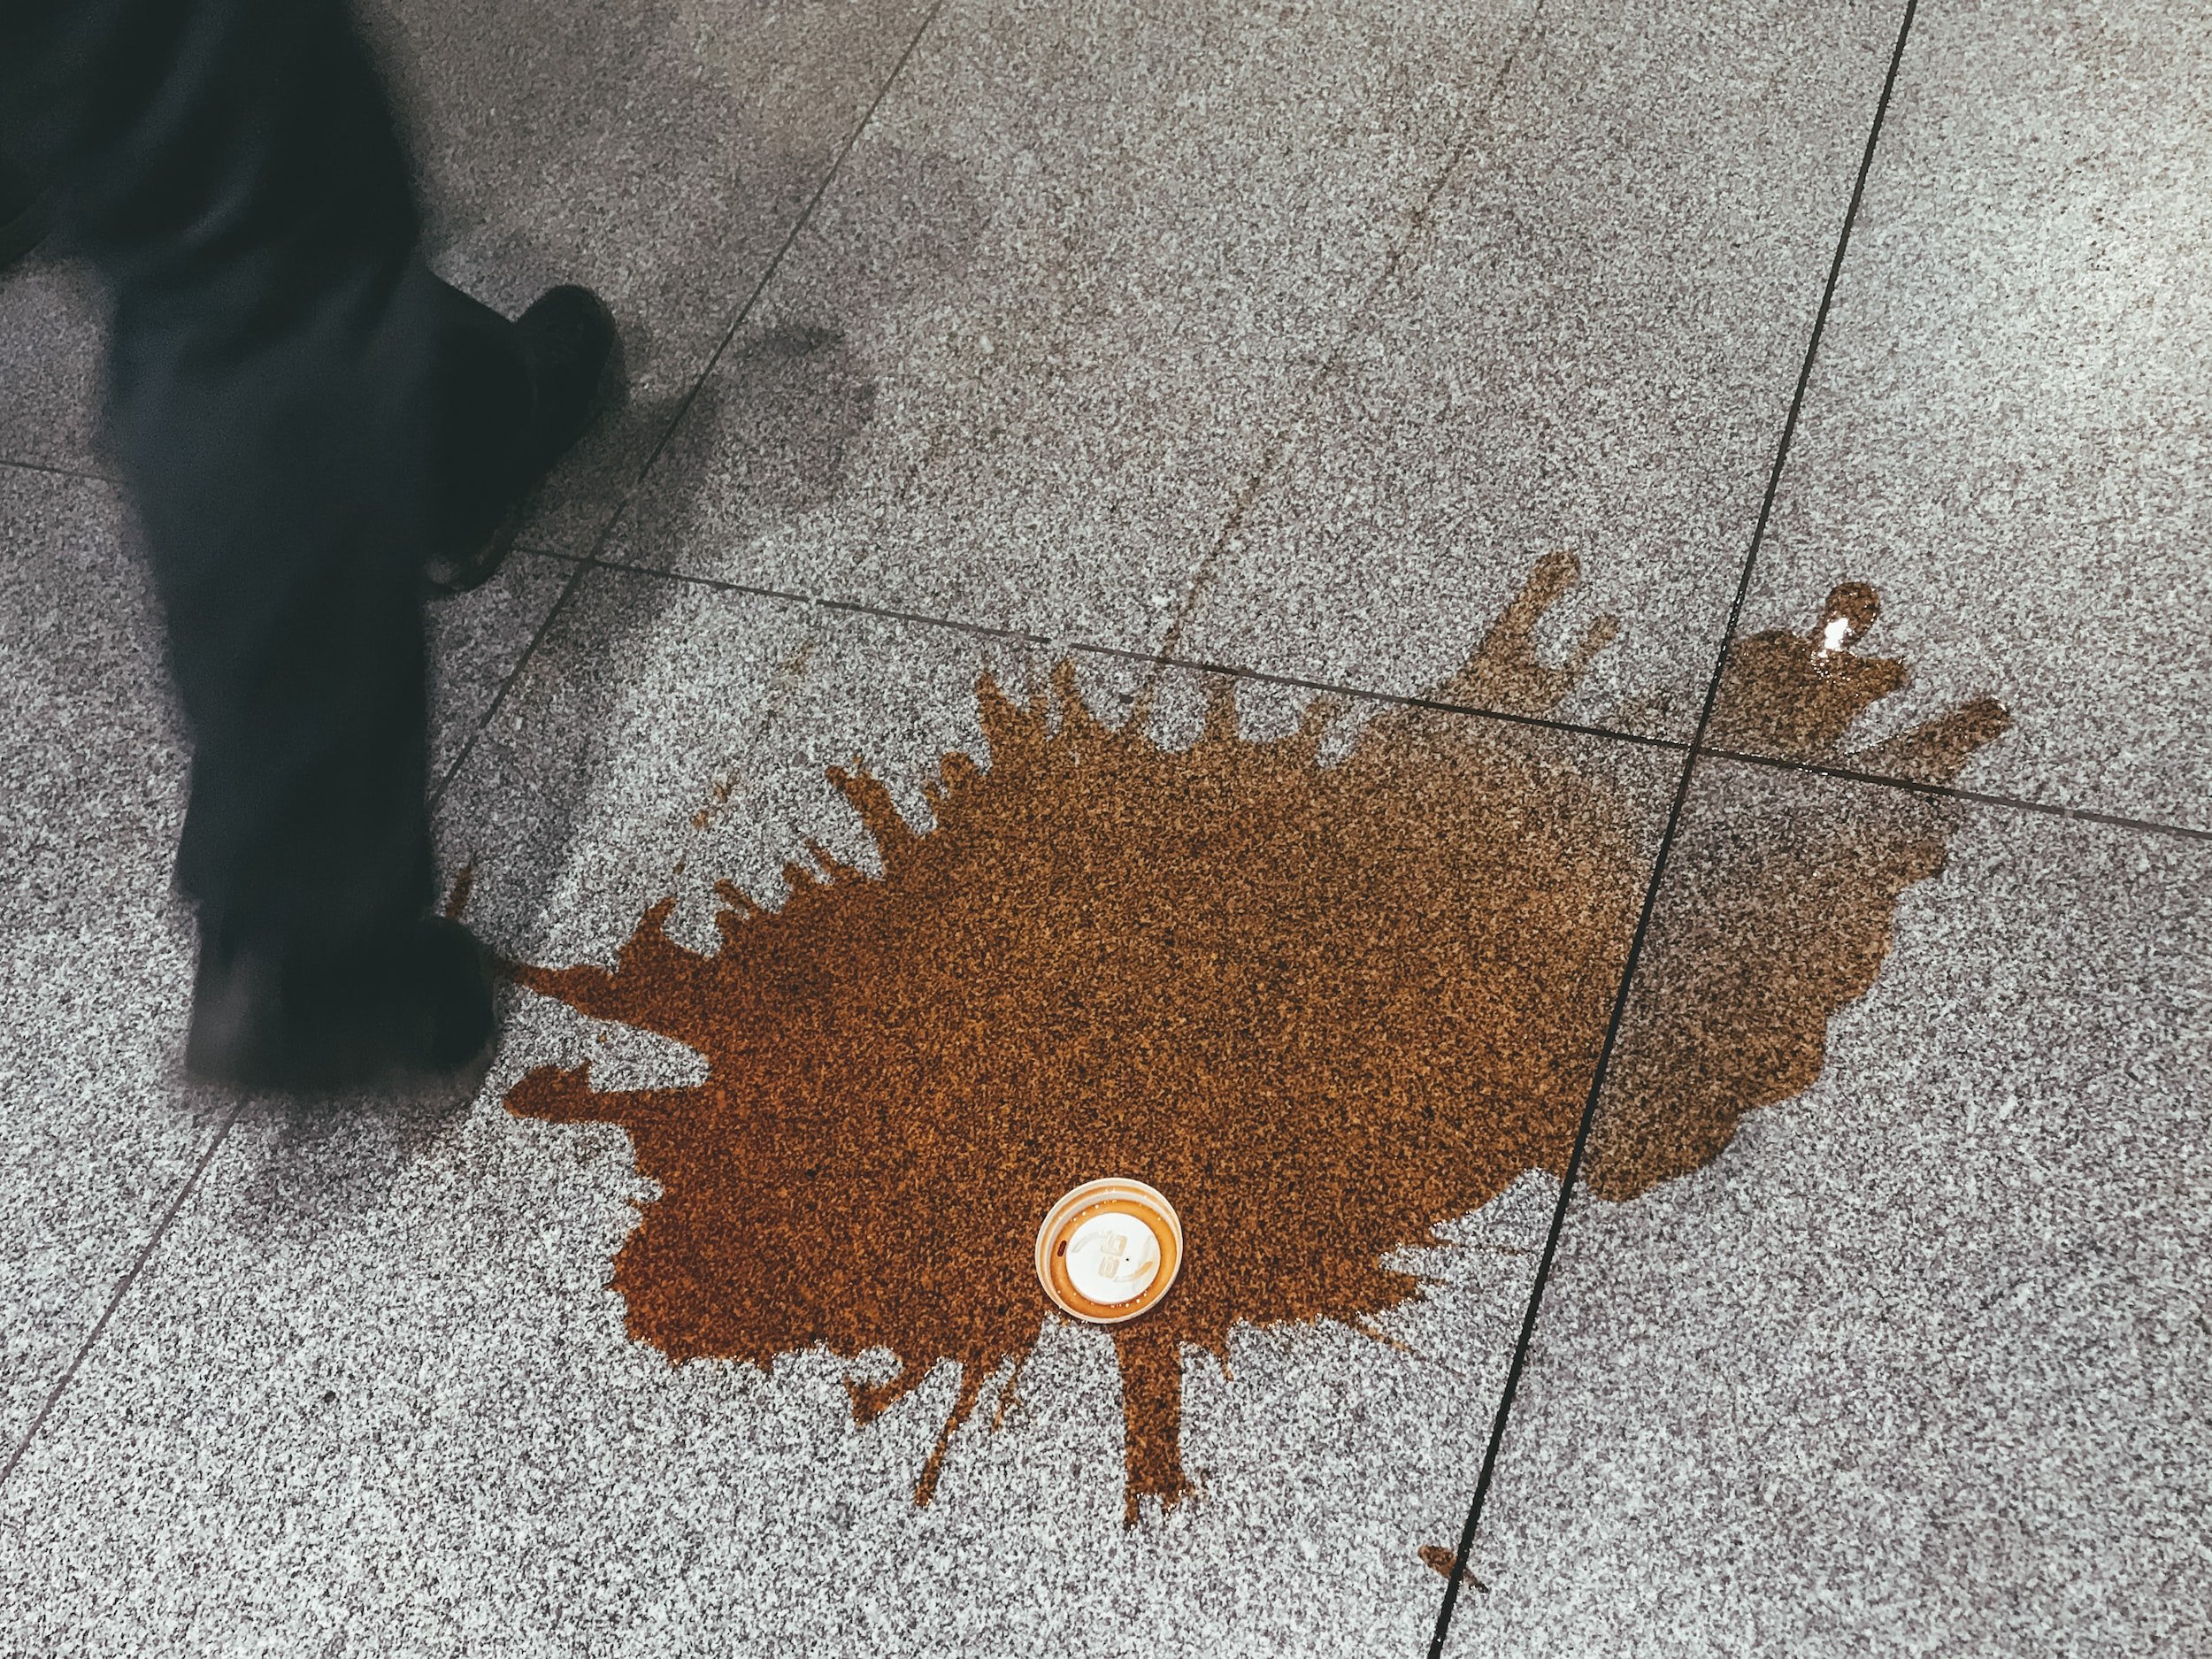 a person walking by a puddle of spilled coffee with a plastic cup lid